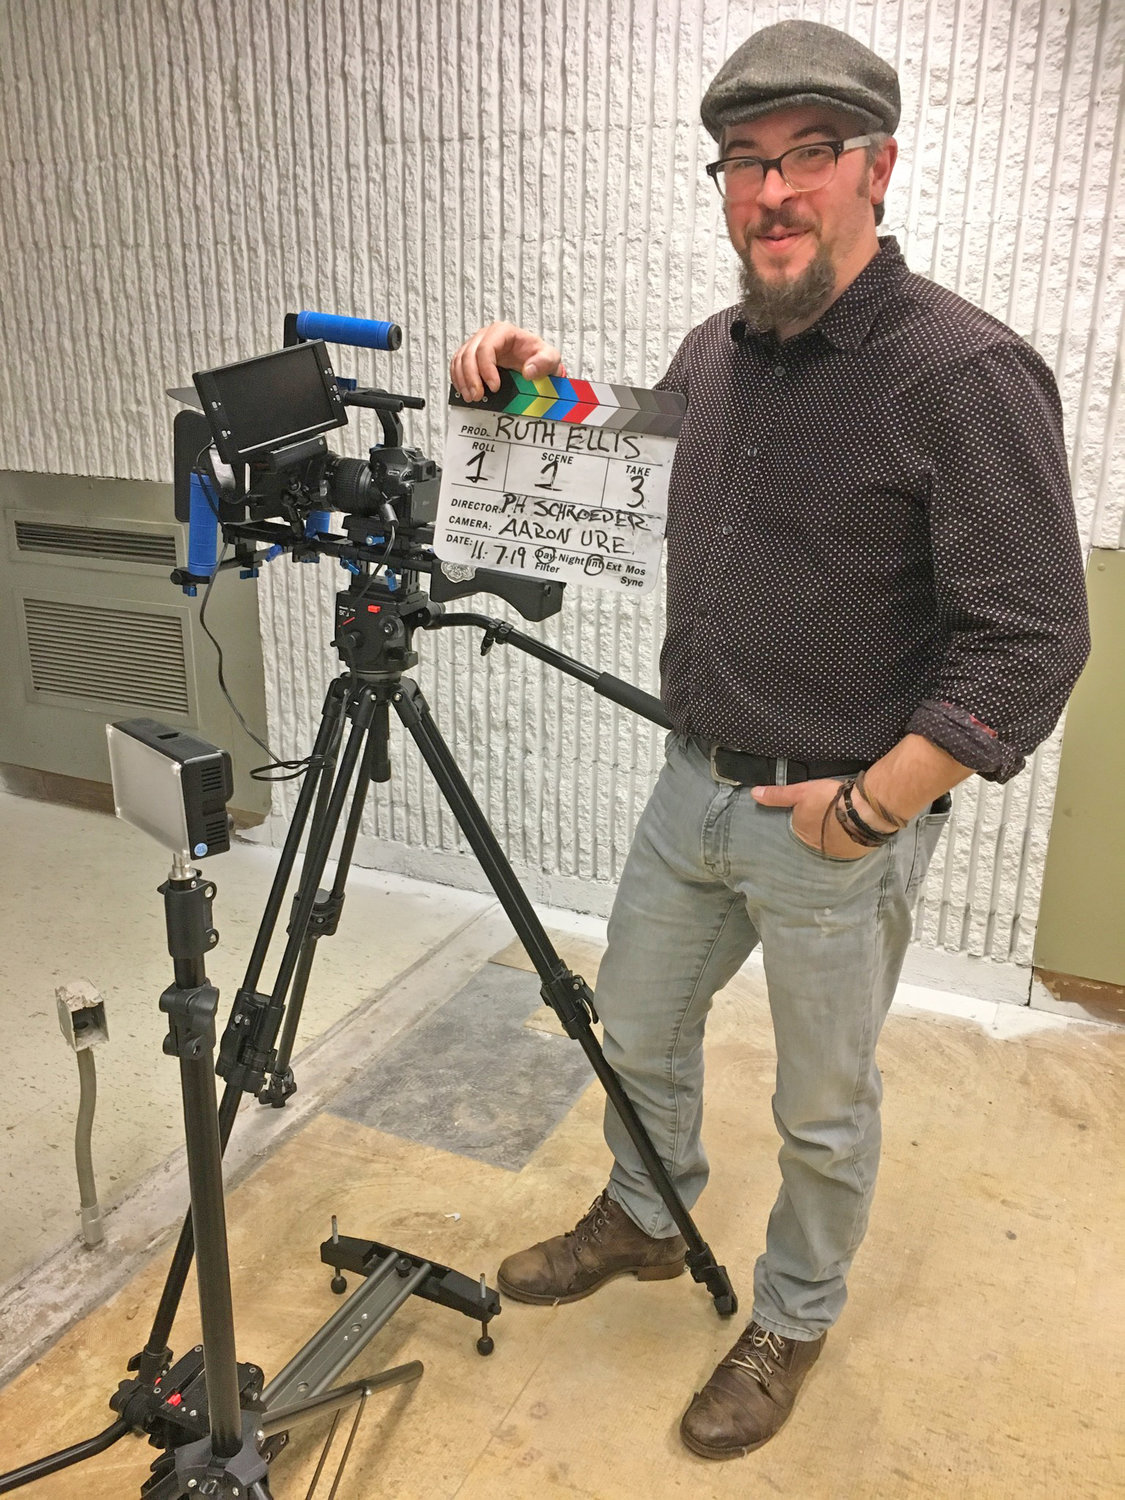 LIGHTS, CAMERA… — Aaron Ure, of Image House Productions in Barneveld, stands by his camera waiting to shoot scenes of the feature-length film, “Ruth Ellis” in Oneida.  A local casting call is going out for an actress qualified to play the lead role.